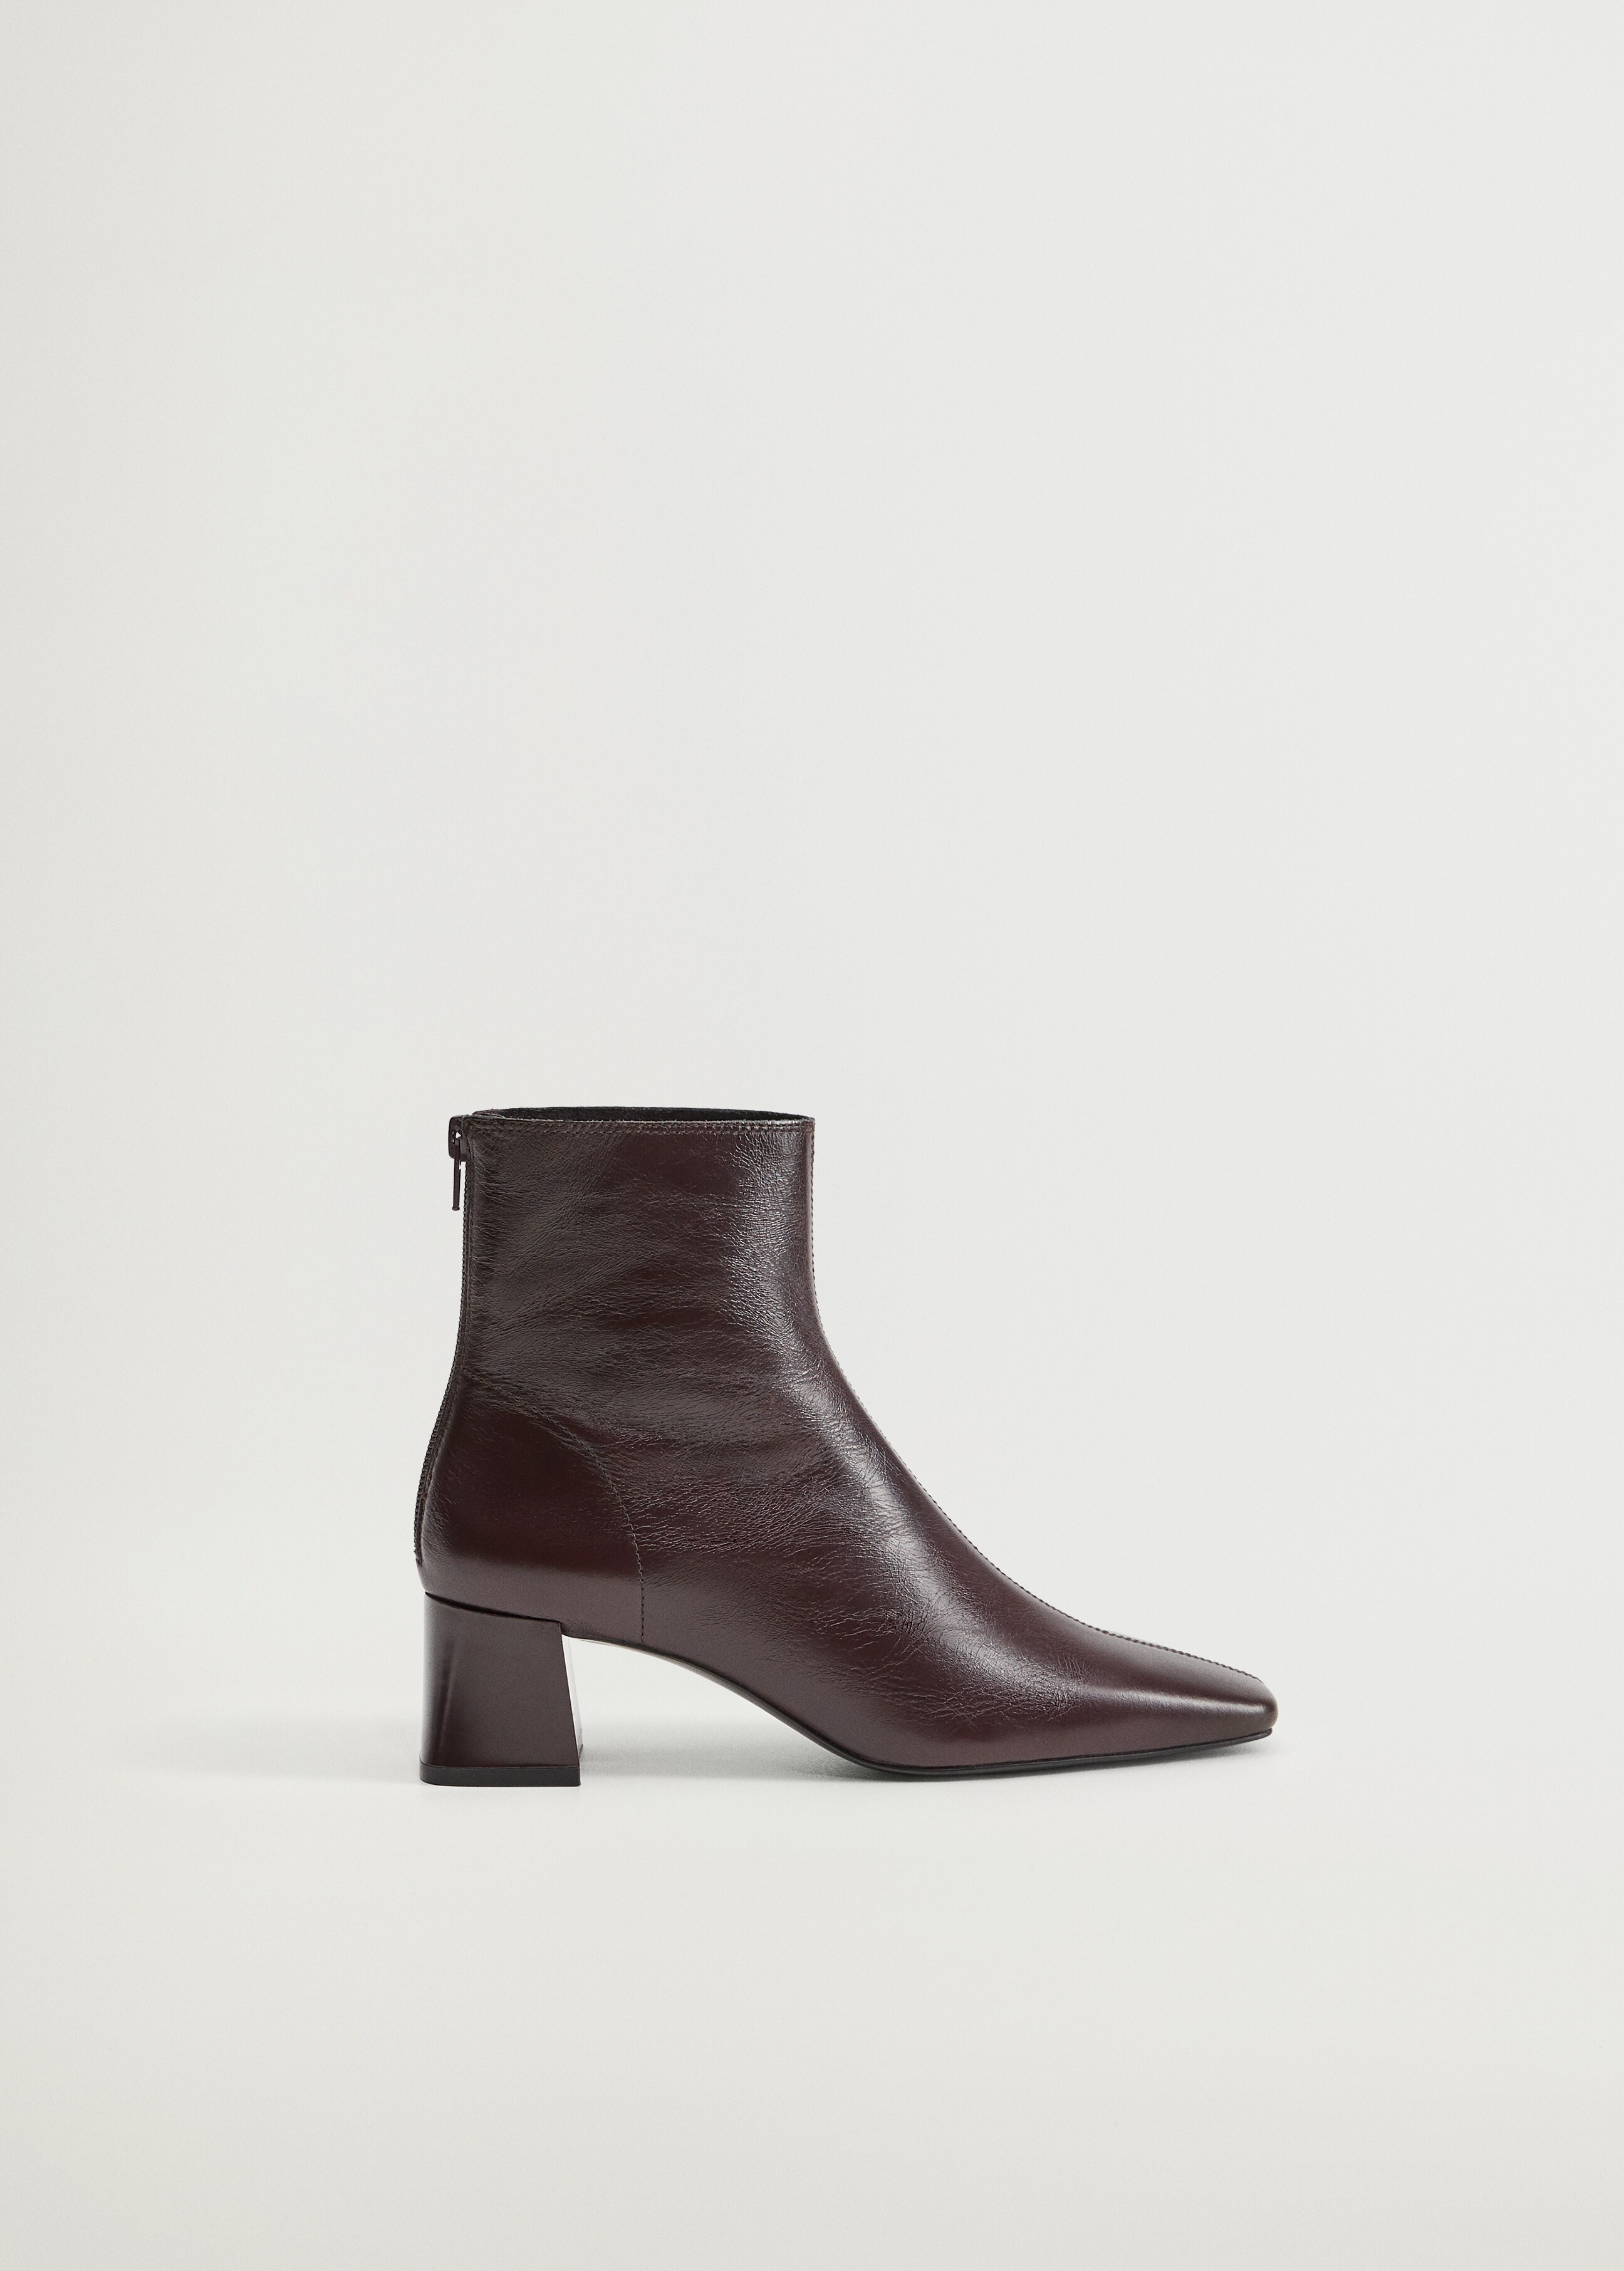 Squared toe leather ankle boots - Article without model